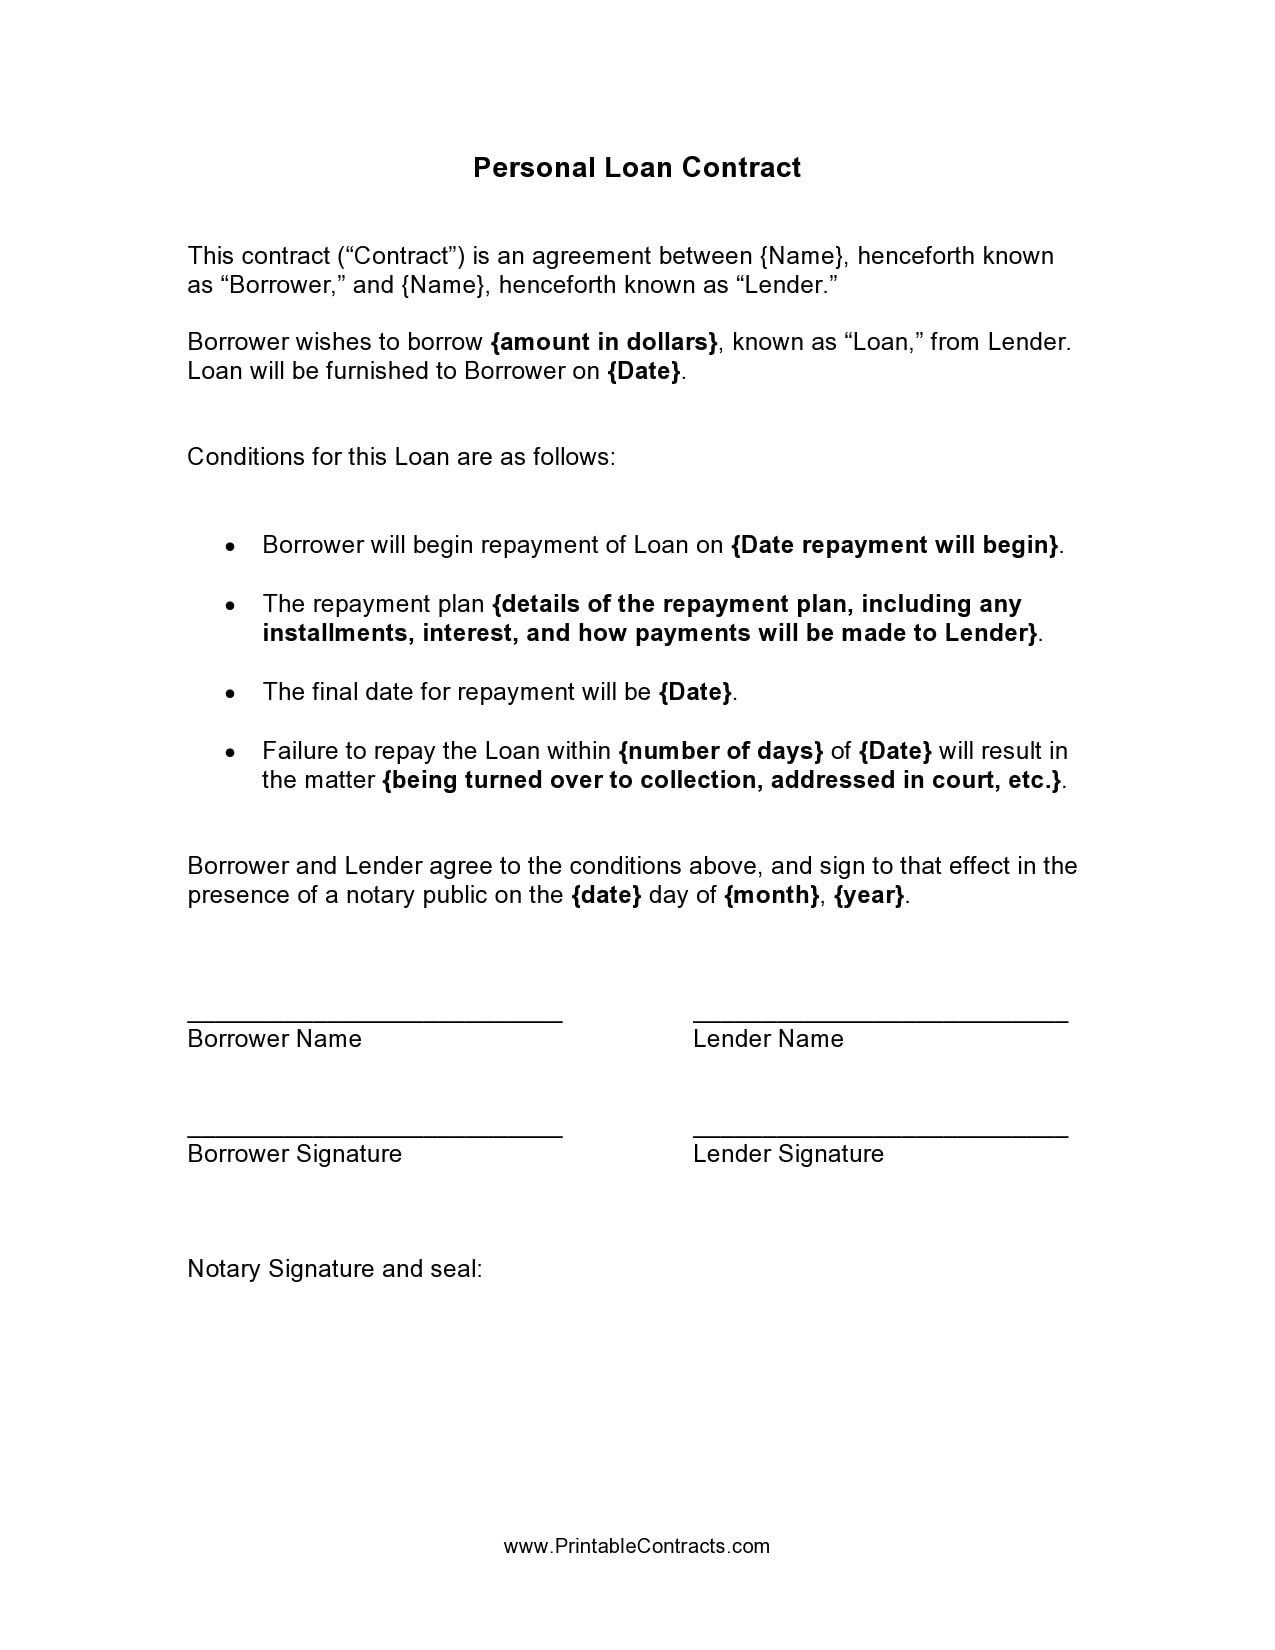 Personal Loan Note Template  DocTemplates